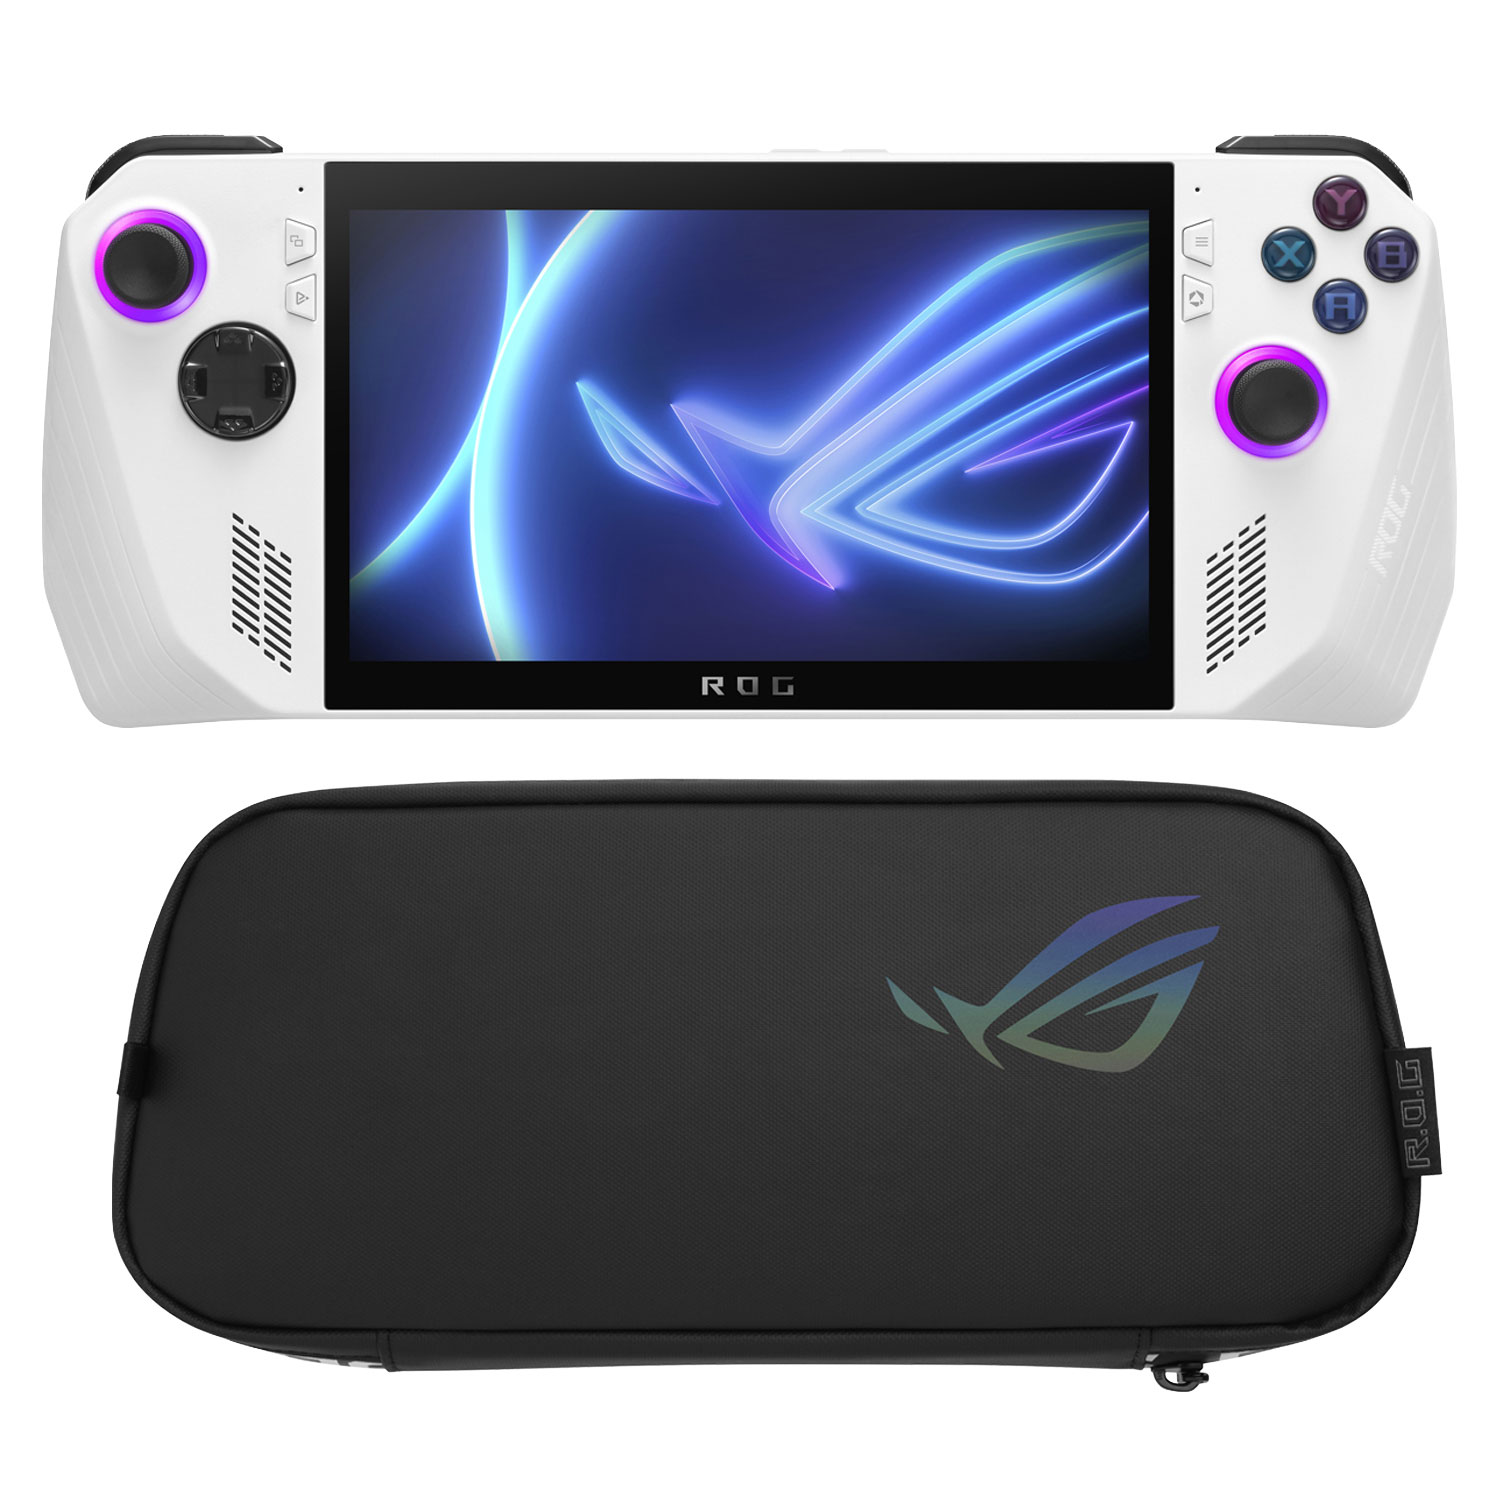 ASUS ROG Ally 7" 1080p Touch Gaming Console with Travel Case - Exclusive Retail Partner